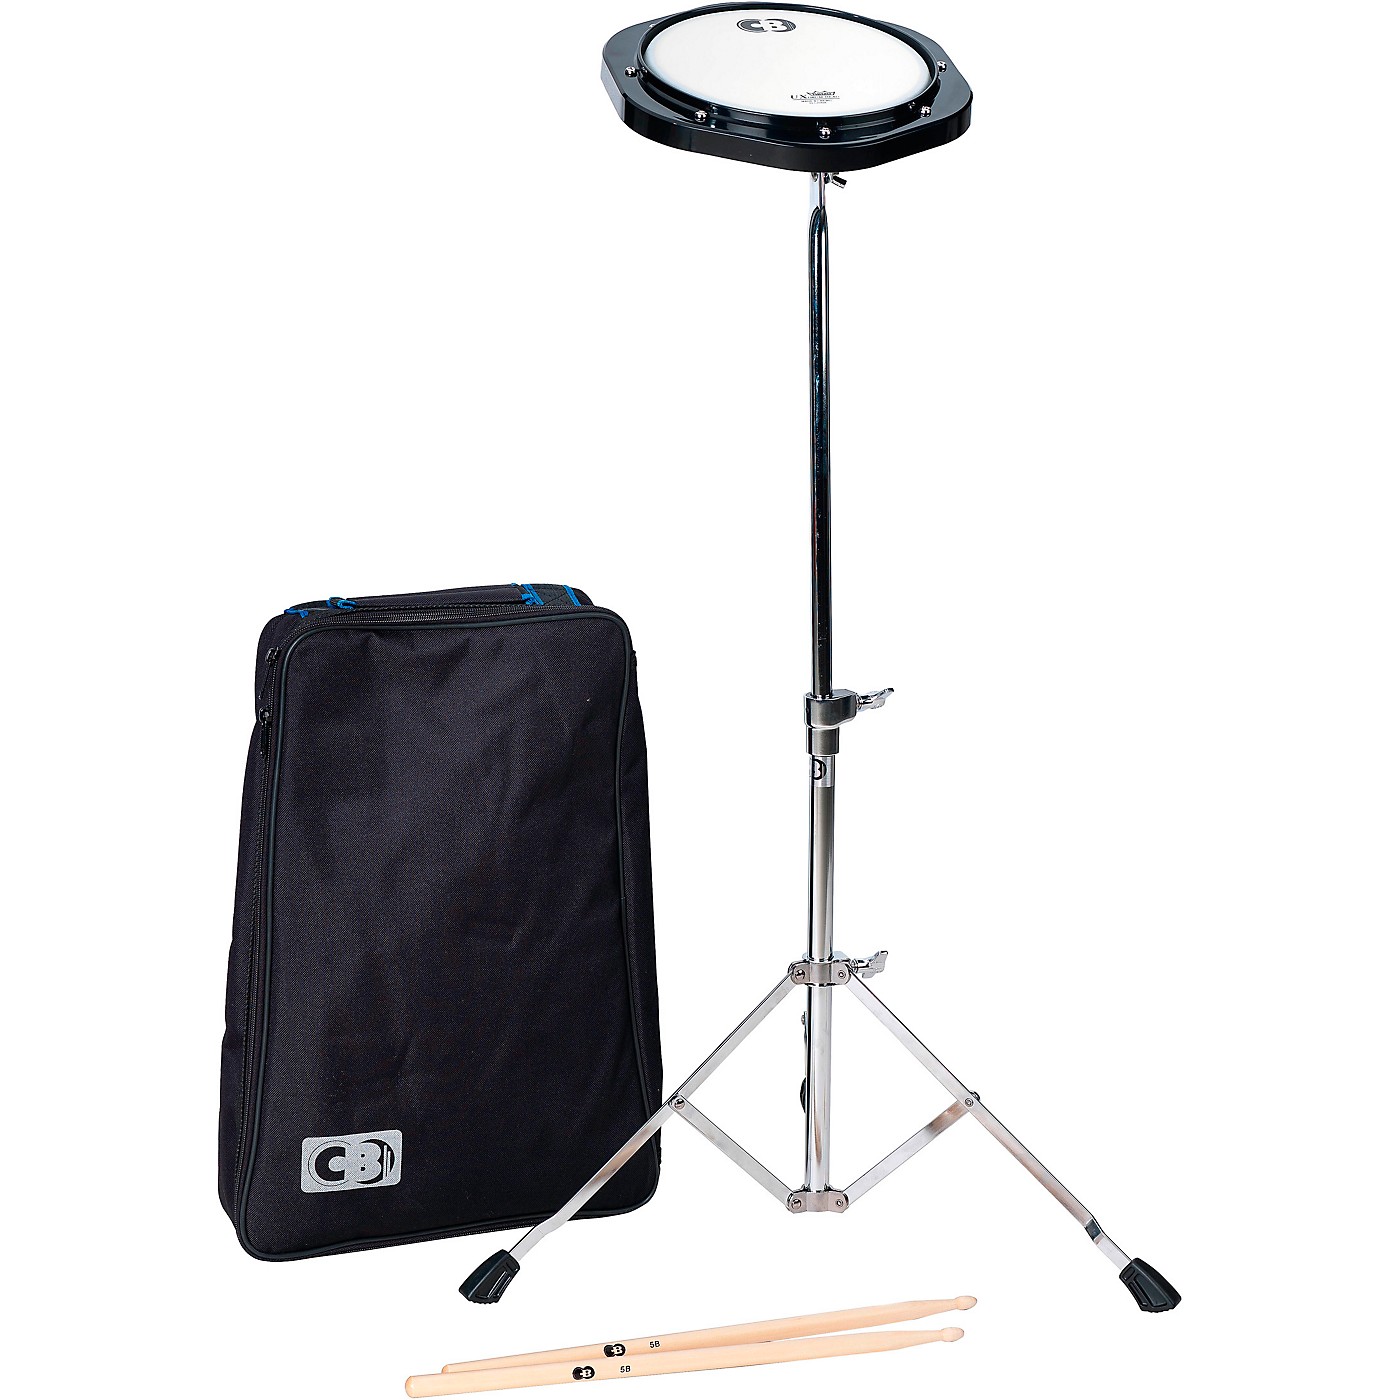 CB Percussion Practice Pad Kit with Stand & Bag thumbnail